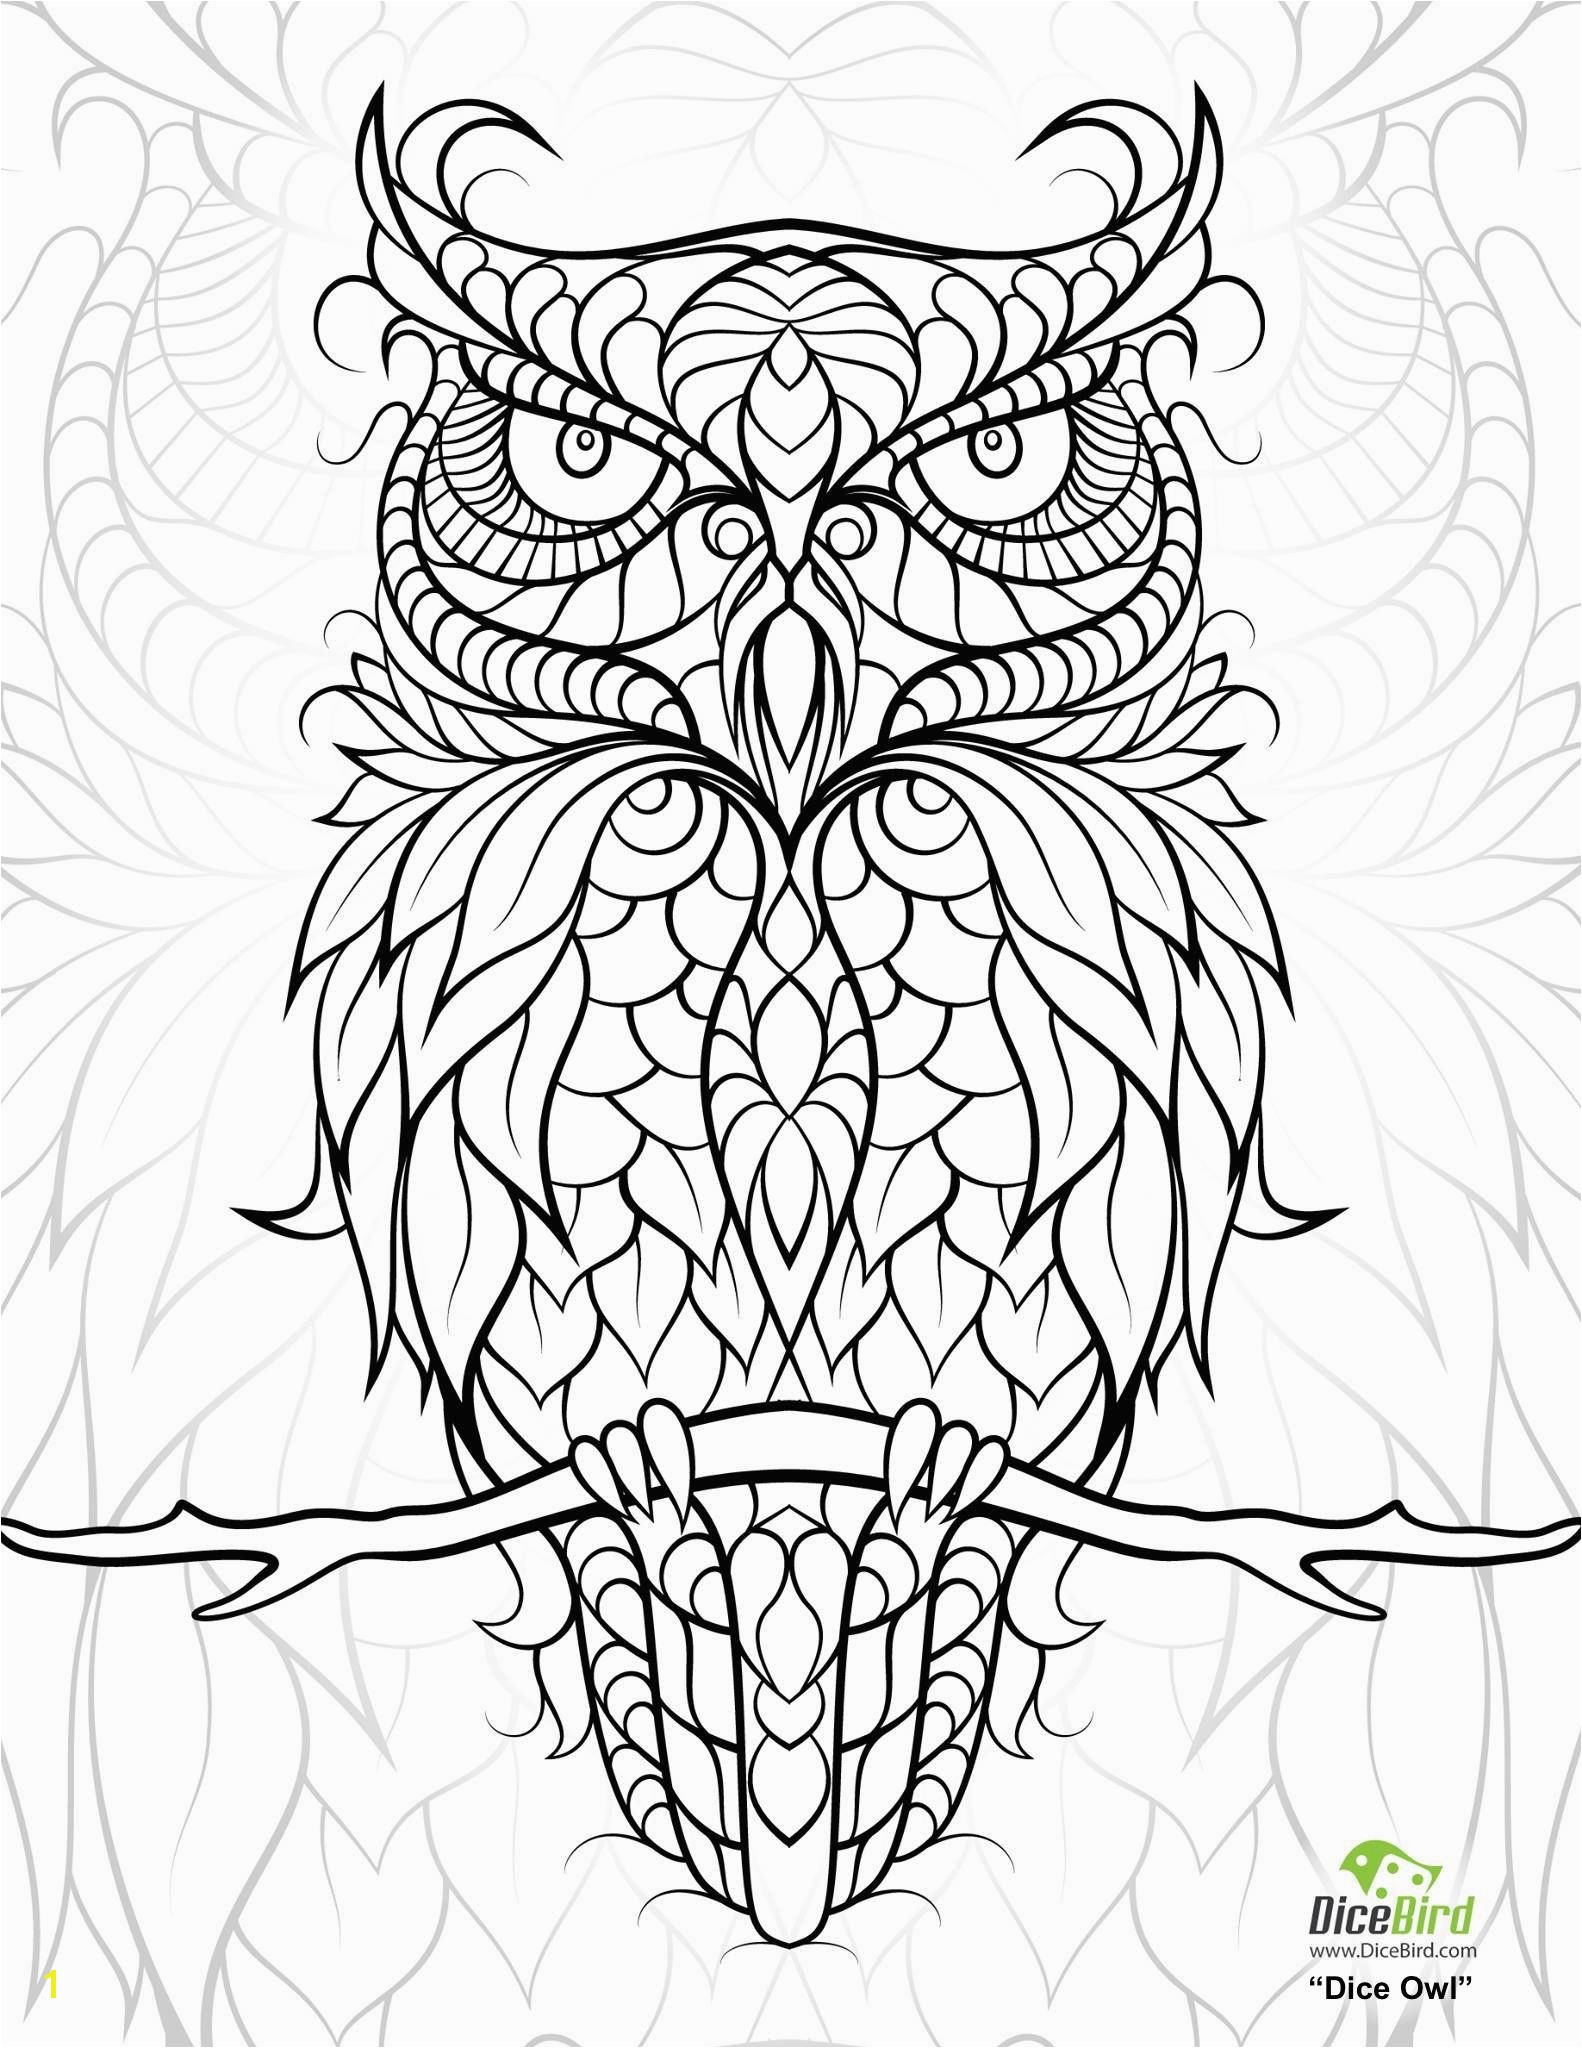 Owl Coloring Pages to Print for Adults Free Printable Owl Coloring Pages for Adults Gallery